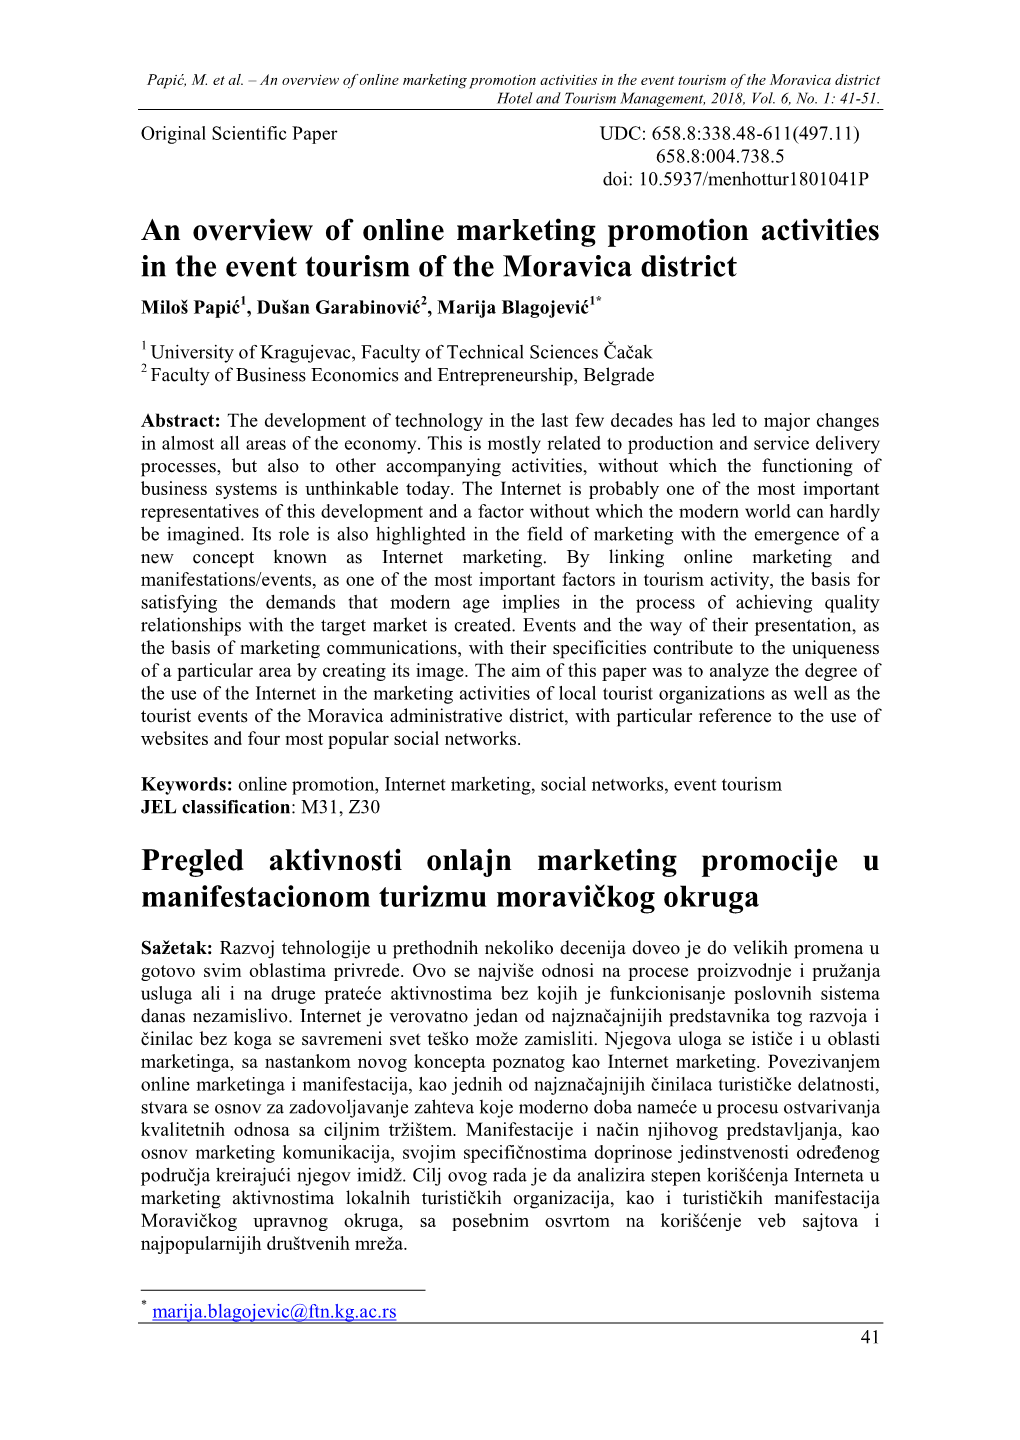 An Overview of Online Marketing Promotion Activities in the Event Tourism of the Moravica District Pregled Aktivnosti Onlajn